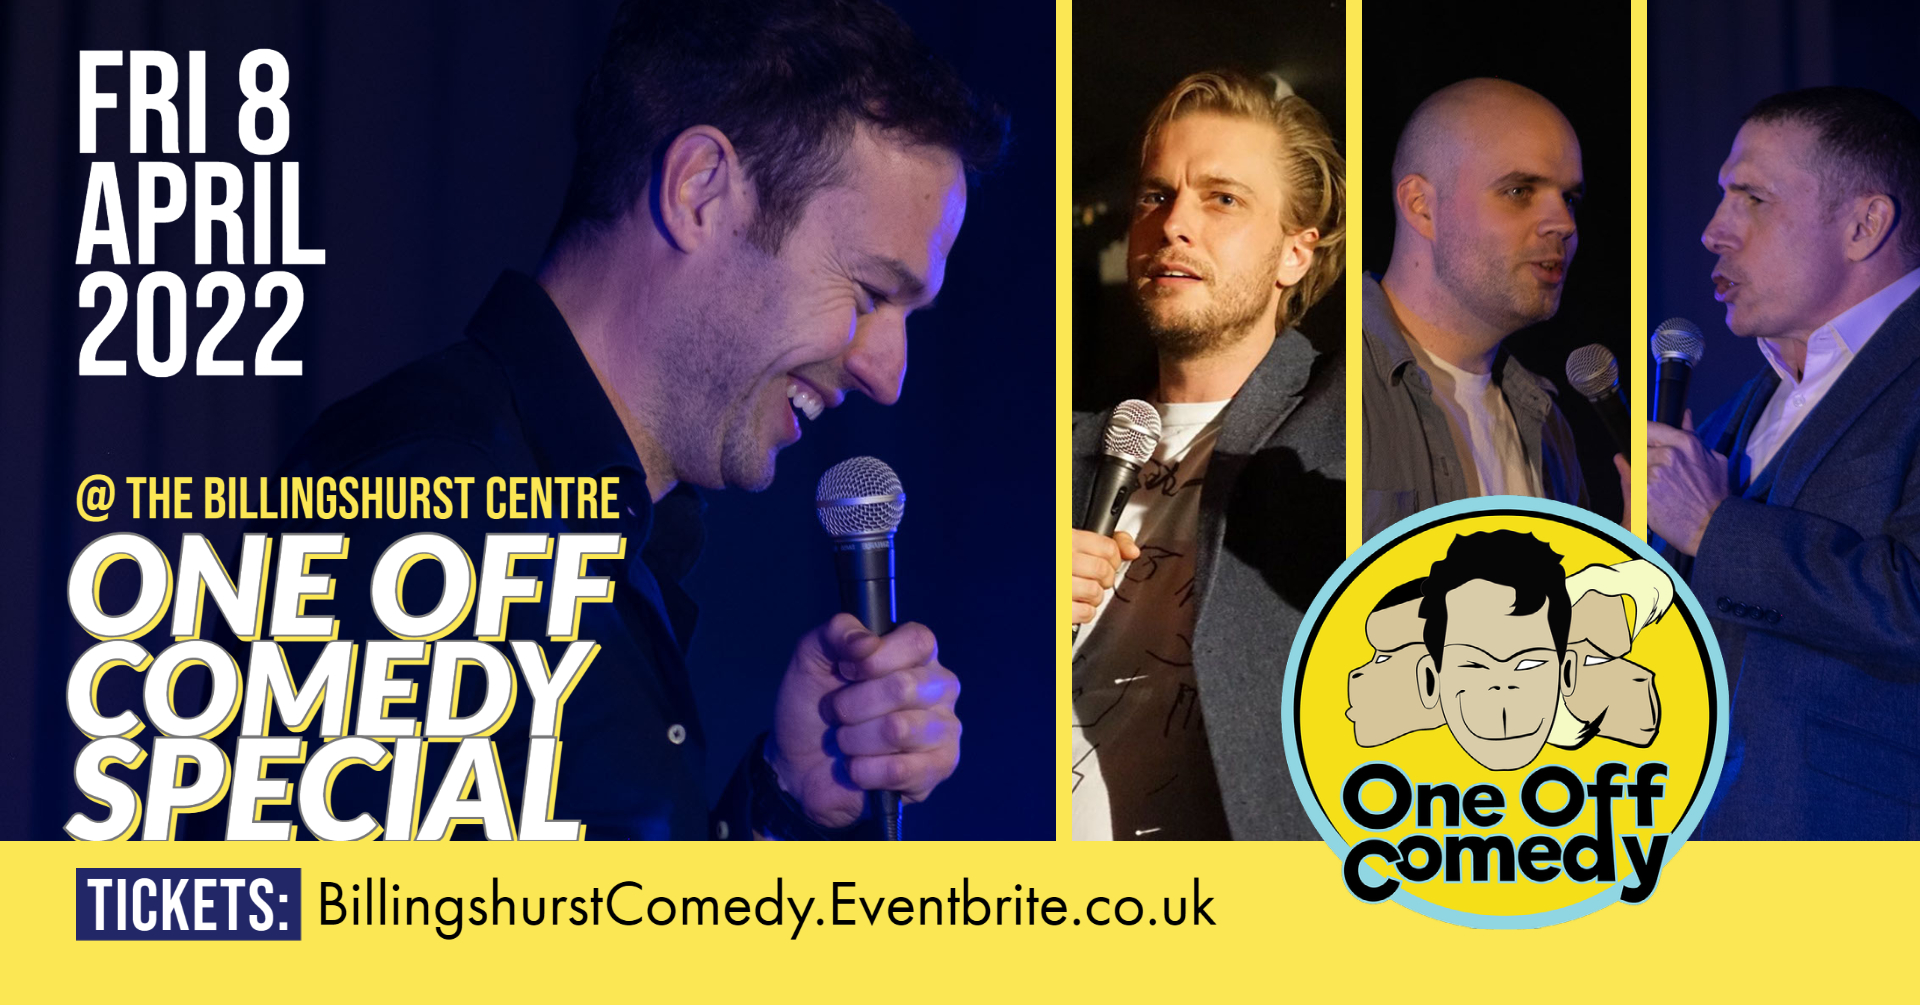 One off Comedy Special billingshurst